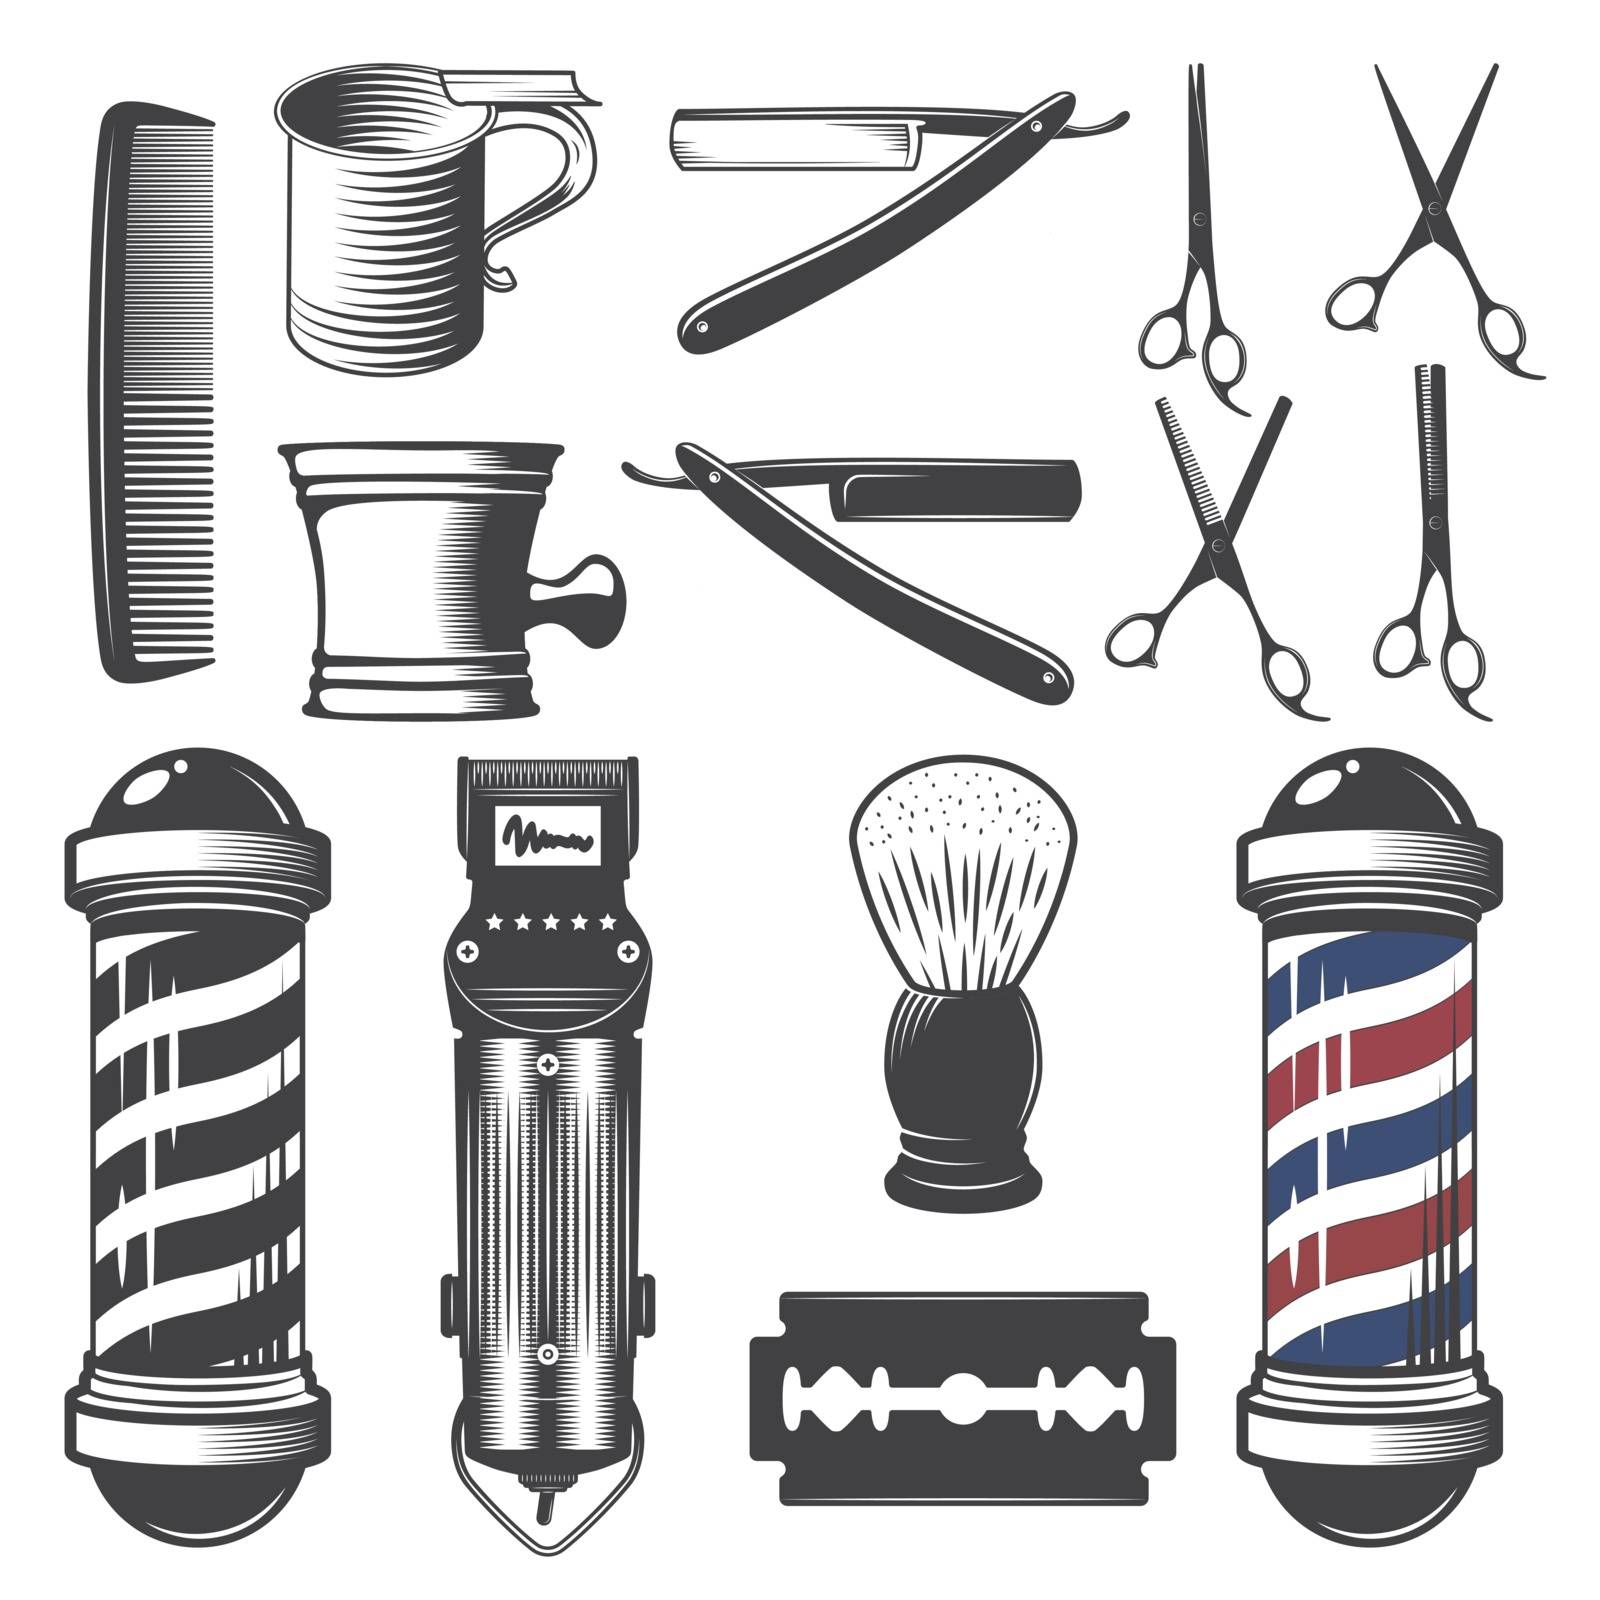 Set of Vintage Barber Shop Elements Isolated on a White Background.